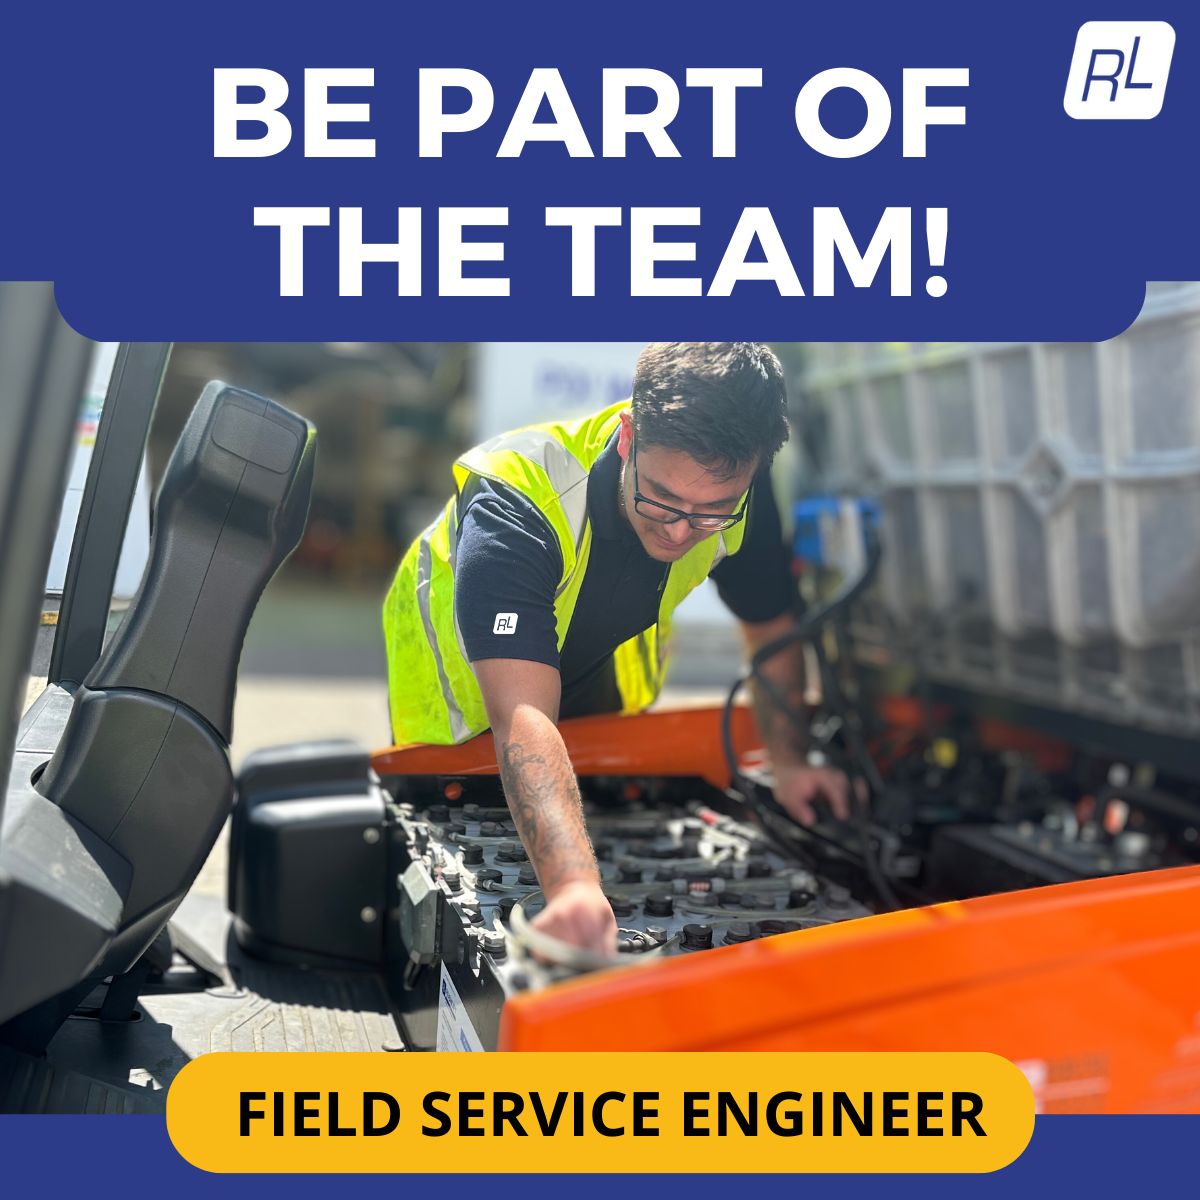 Looking for a new challenge? ​​
​Join our national team of Field Service Engineers!​

Find out more 👉hhttps://www.rushlift.co.uk/join-our-team/field-service-engineer-various-locations-in-the-uk​
​​
#Careers #Vacancy #Hiring #JoinTheTeam #Engineer #FieldServiceEngineer #MHE